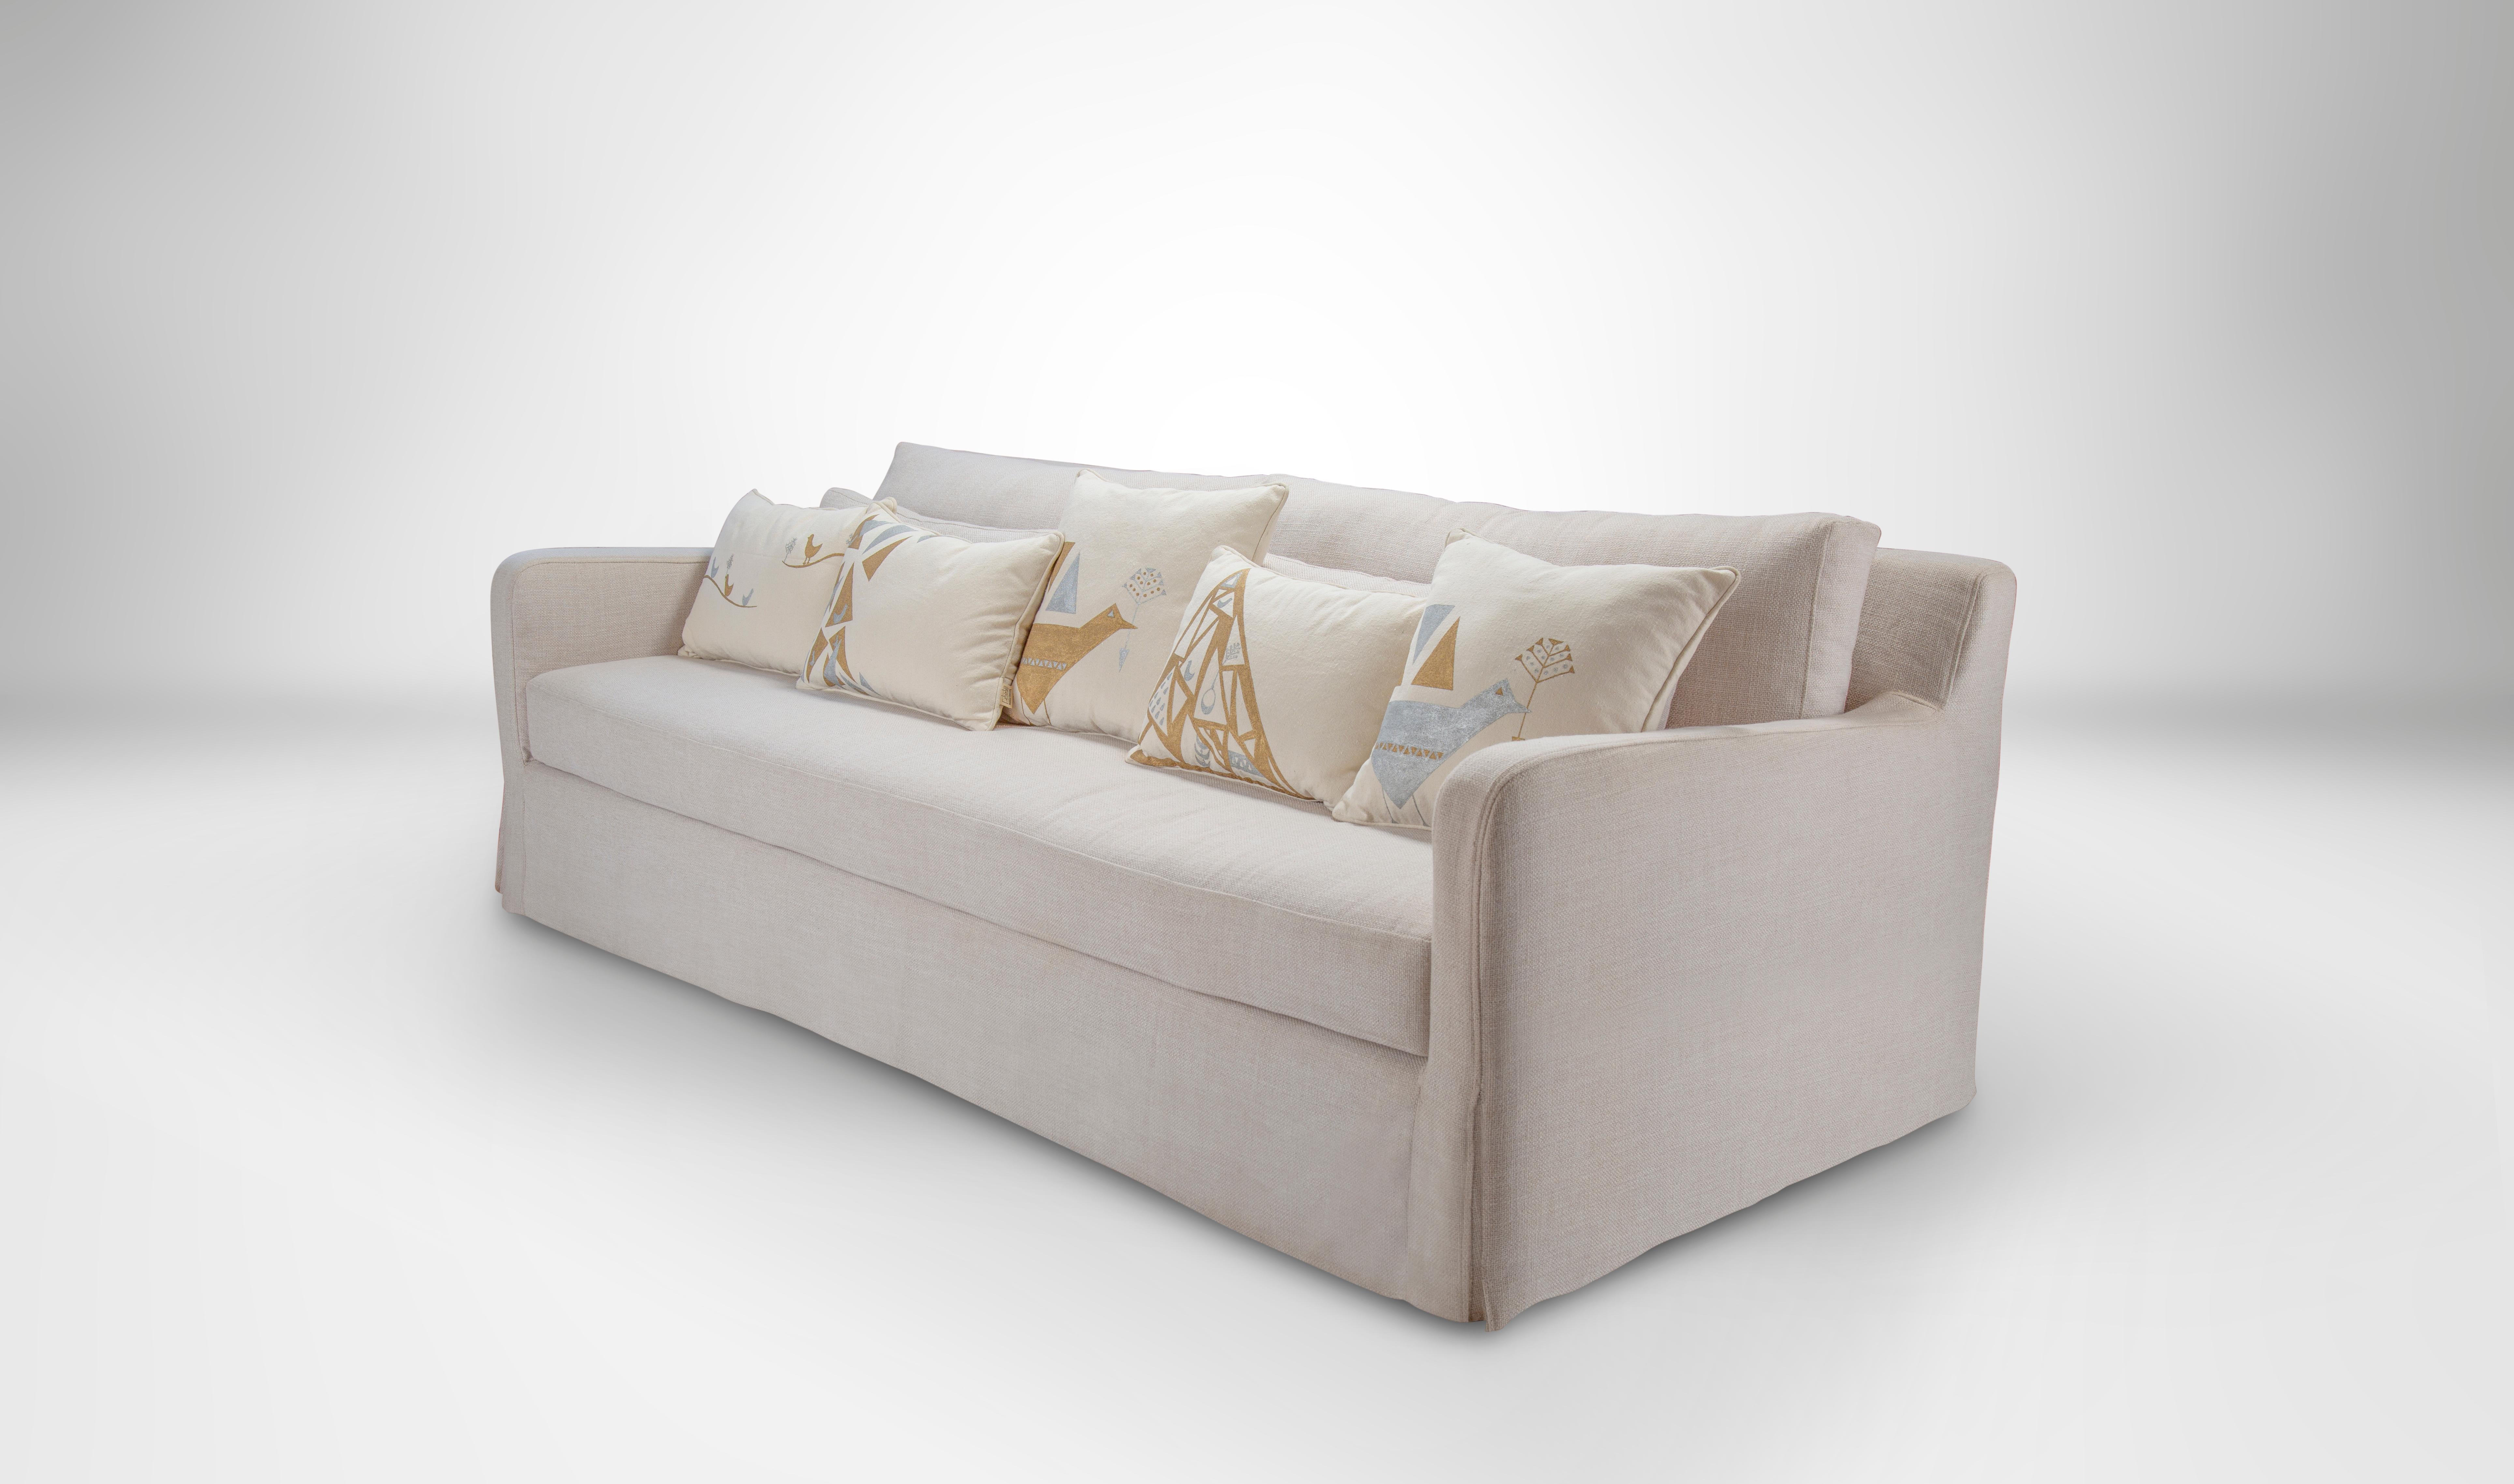 Modern Comfortable Slip-on 3-Seater Sofa with Double Stitching and Foam Filling.
It’s all in the details; the fine double-seamed finish, subtle slanting arm rest and discreet slits on the bottom corners are what make our Modern Slip-On sofa so